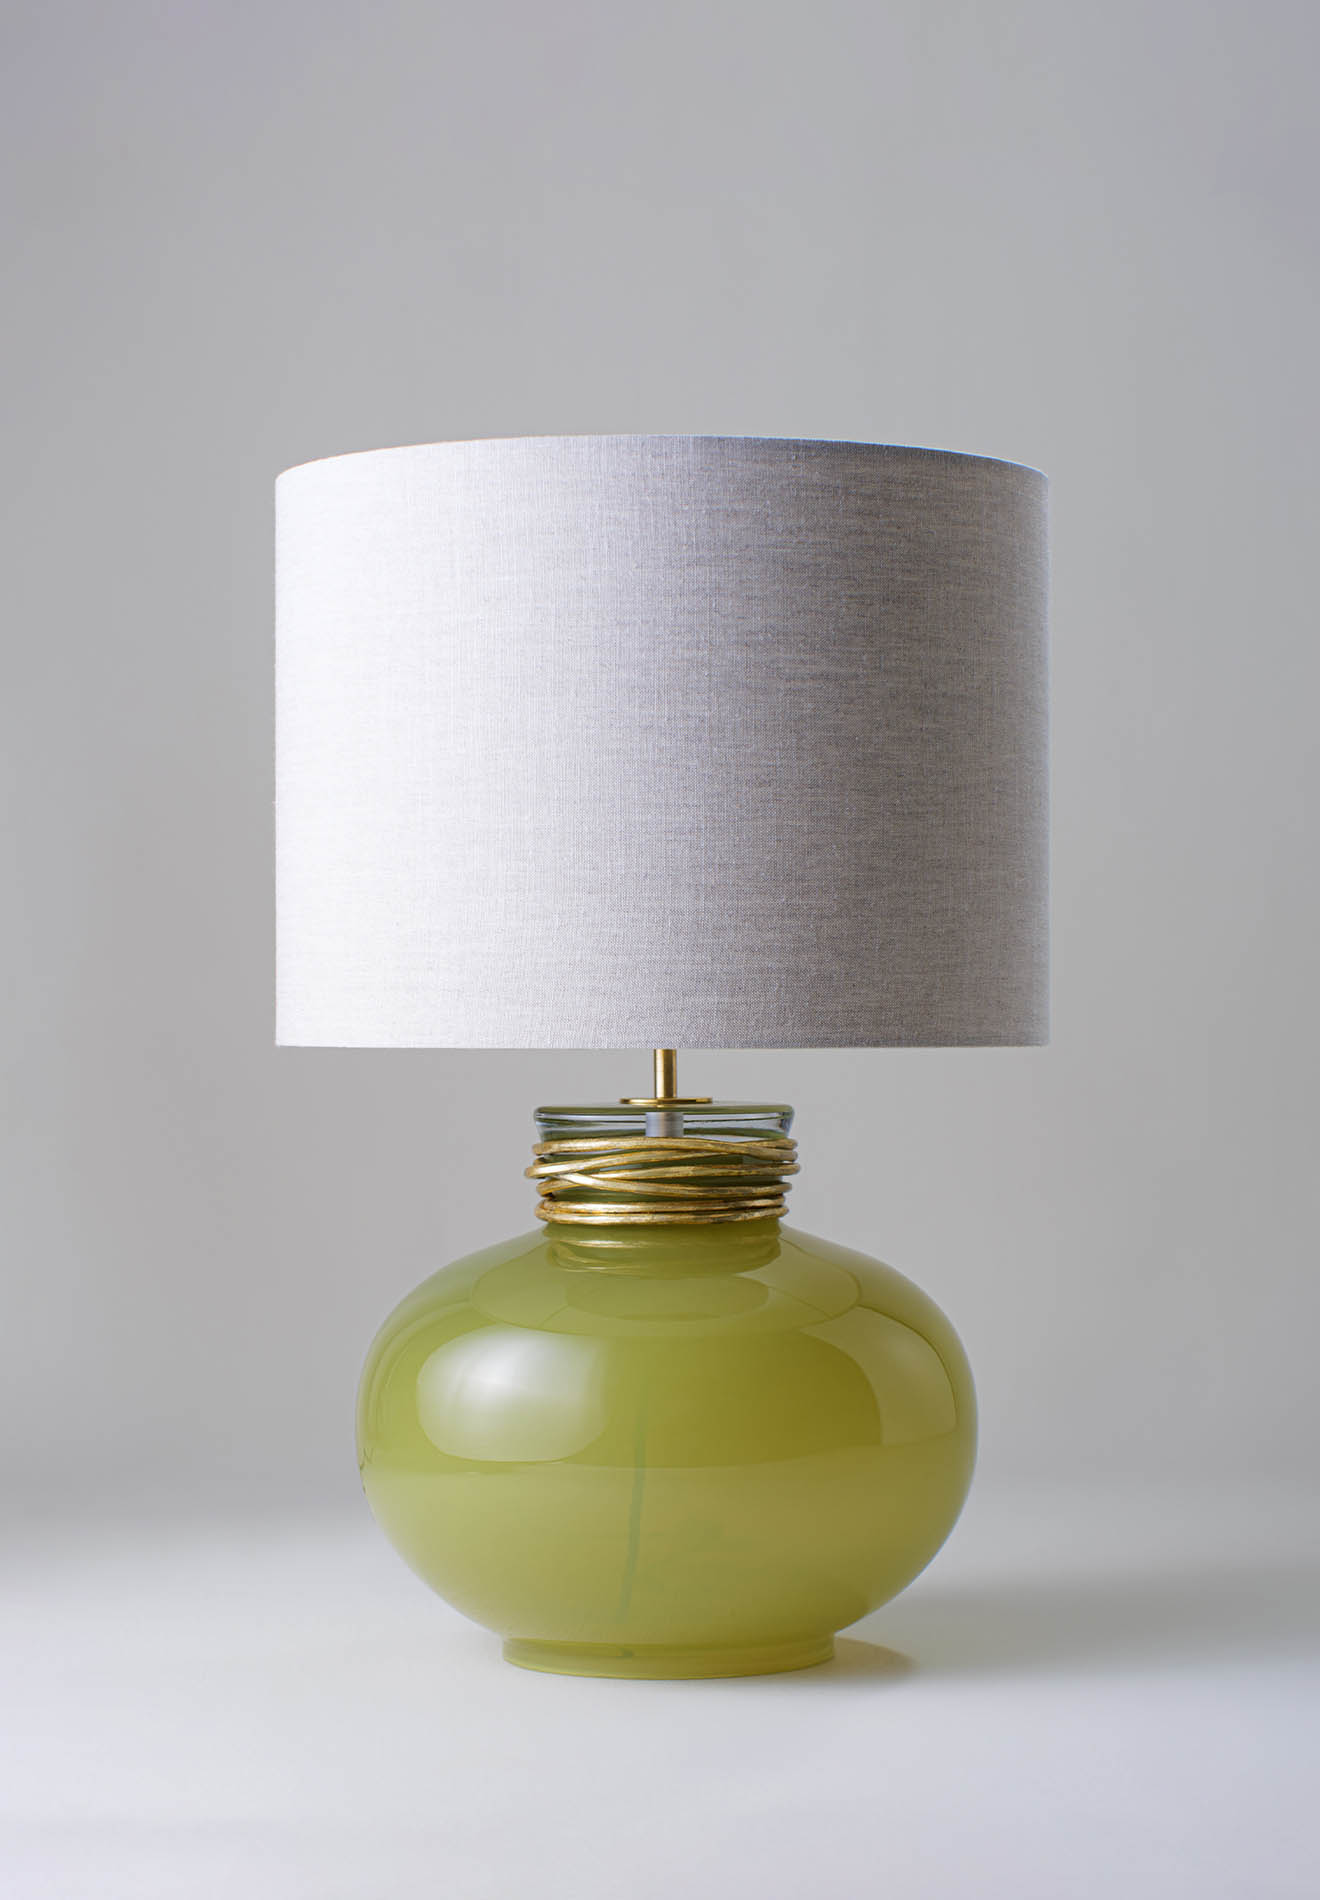 Split Pea with Bodu Gold collar shown with 16" Tall Cylinder in Natural Linen with Cream Card lining